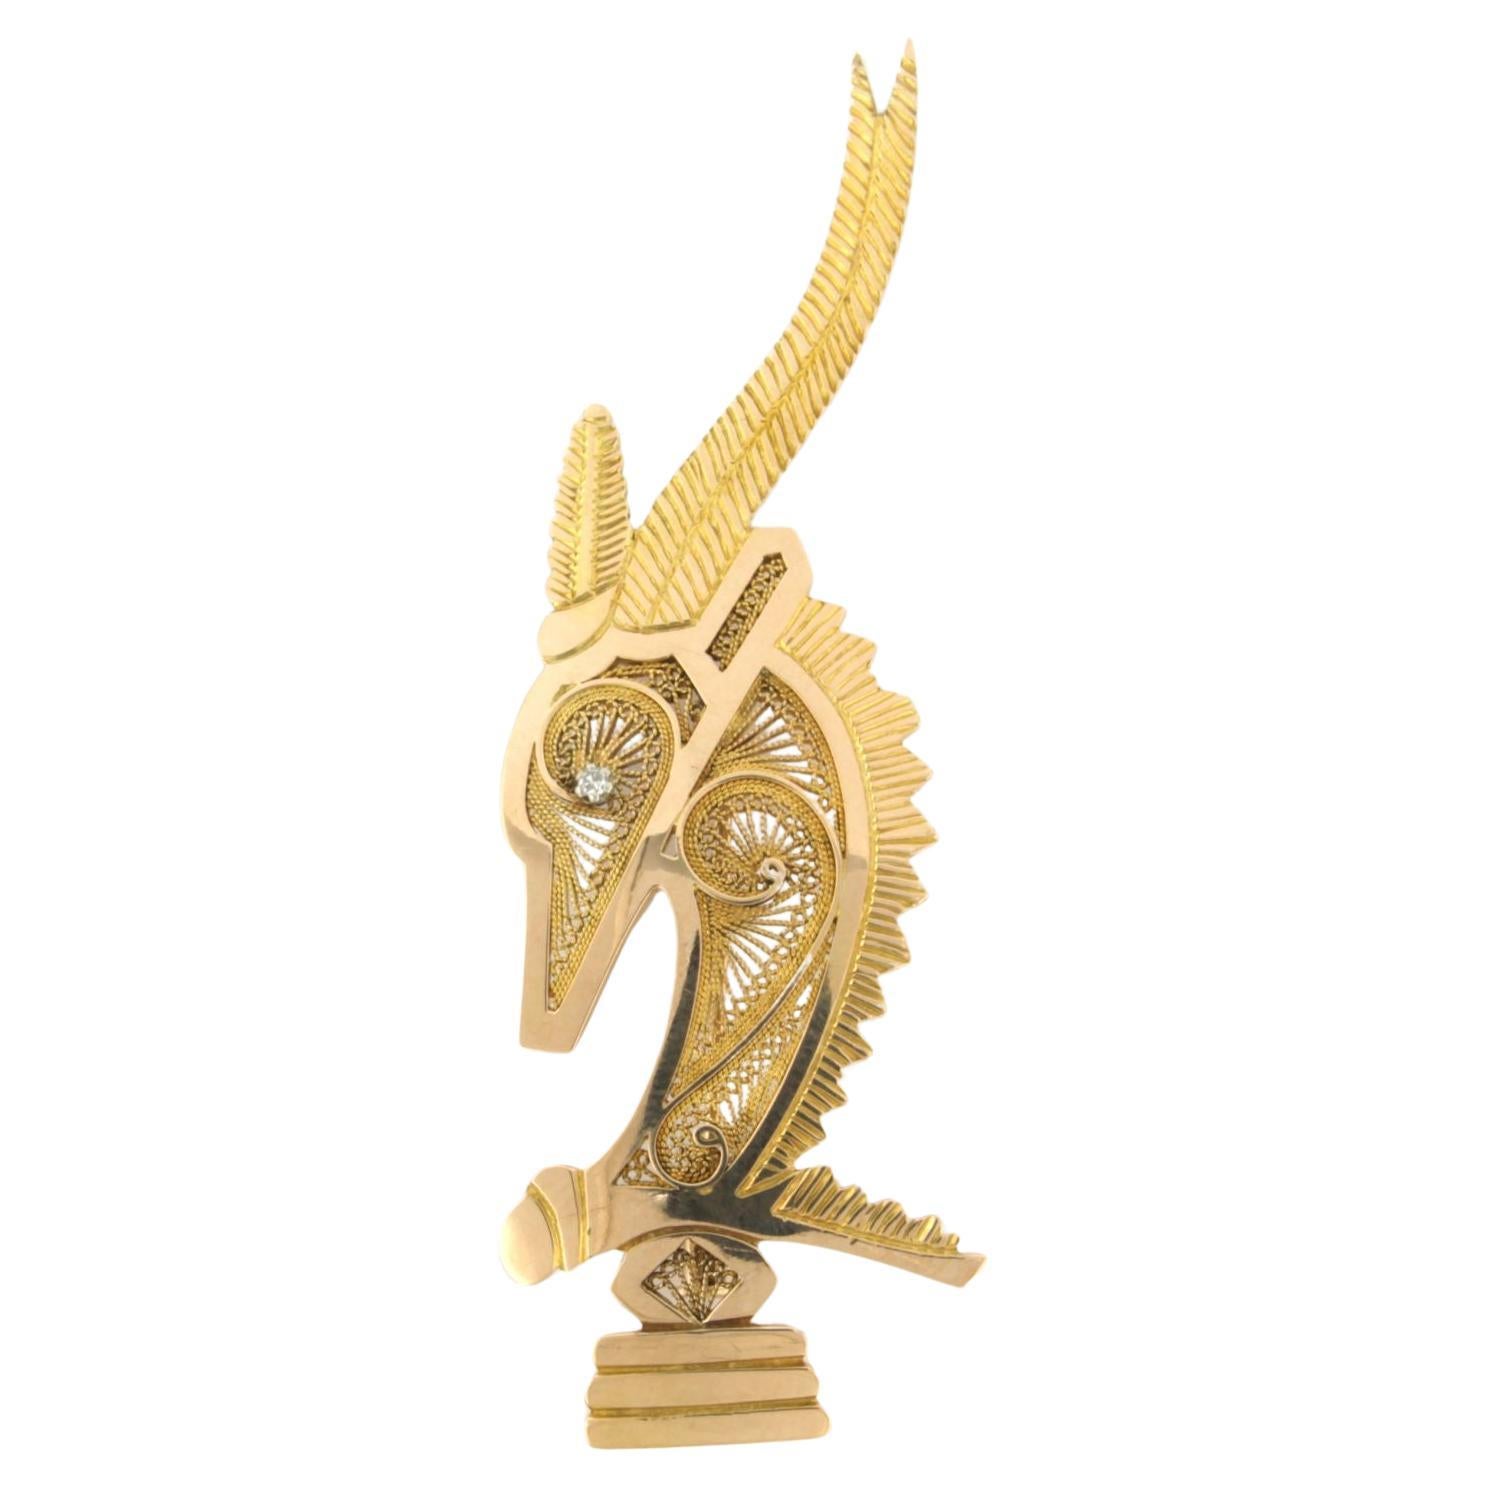 Brooch in the shape of a Trojan horse set with single cut diamond 18k pink gold